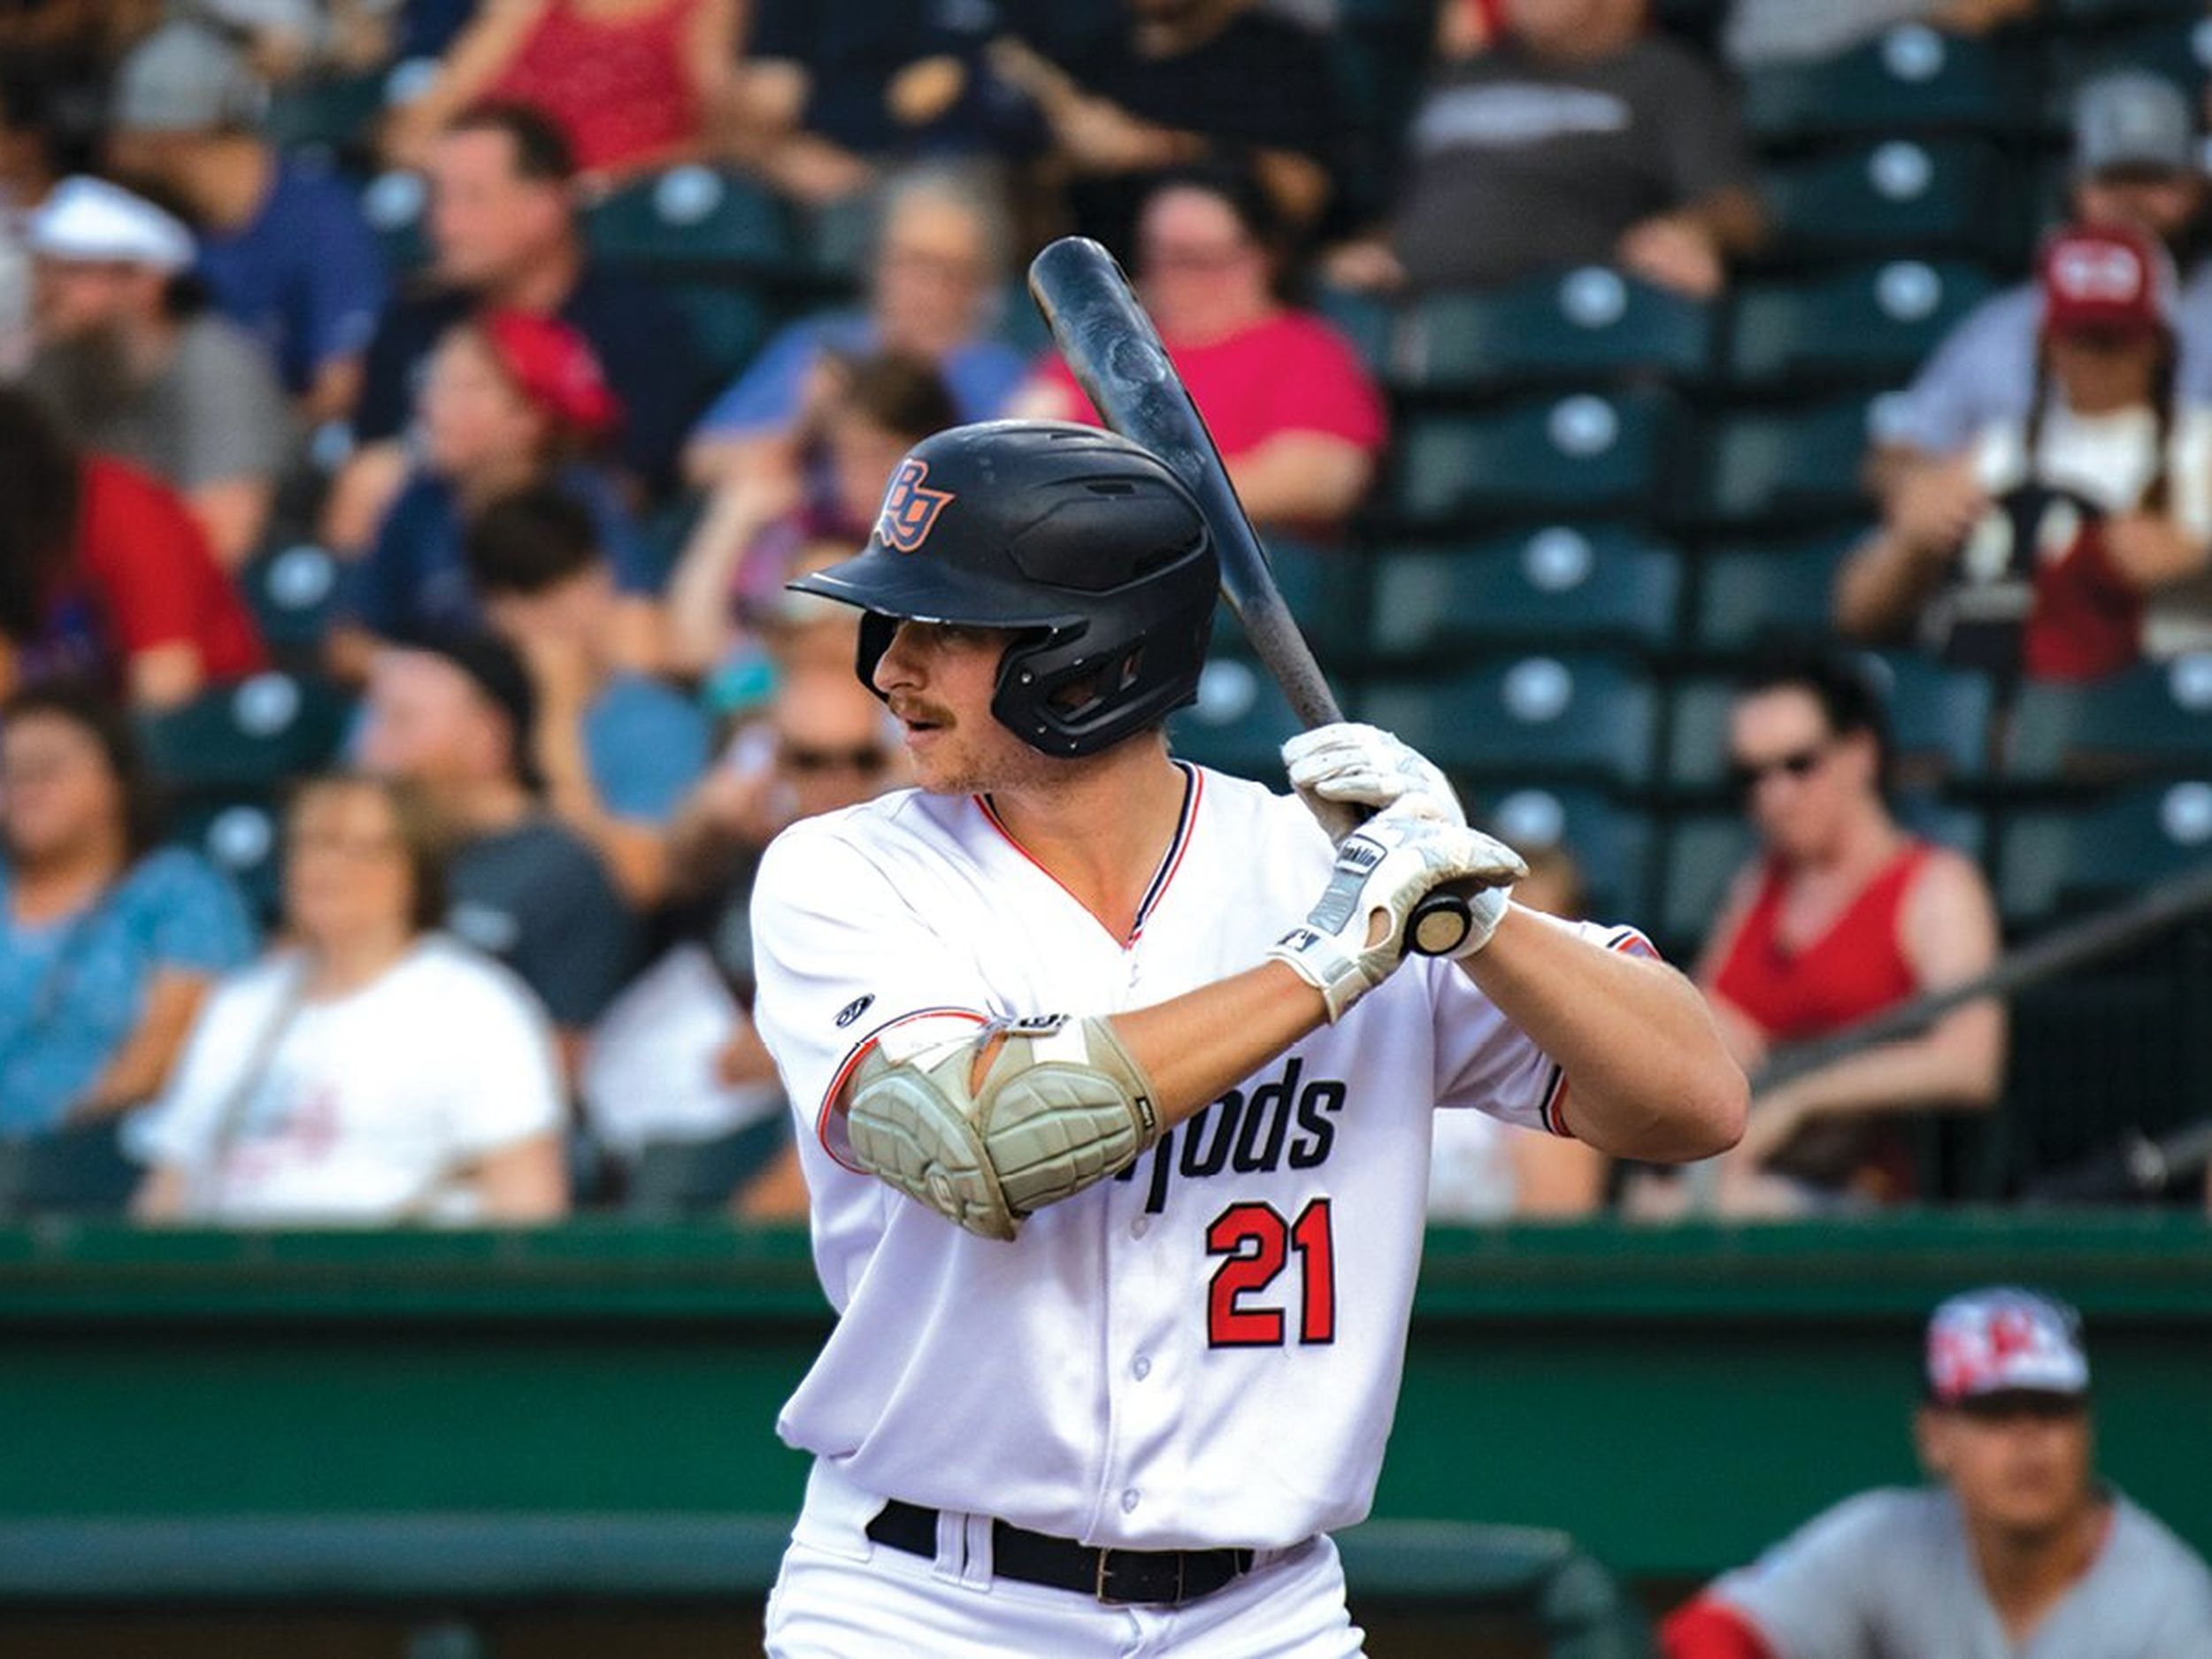 Hickory Crawdads swept by Bowling Green Hot Rods in six